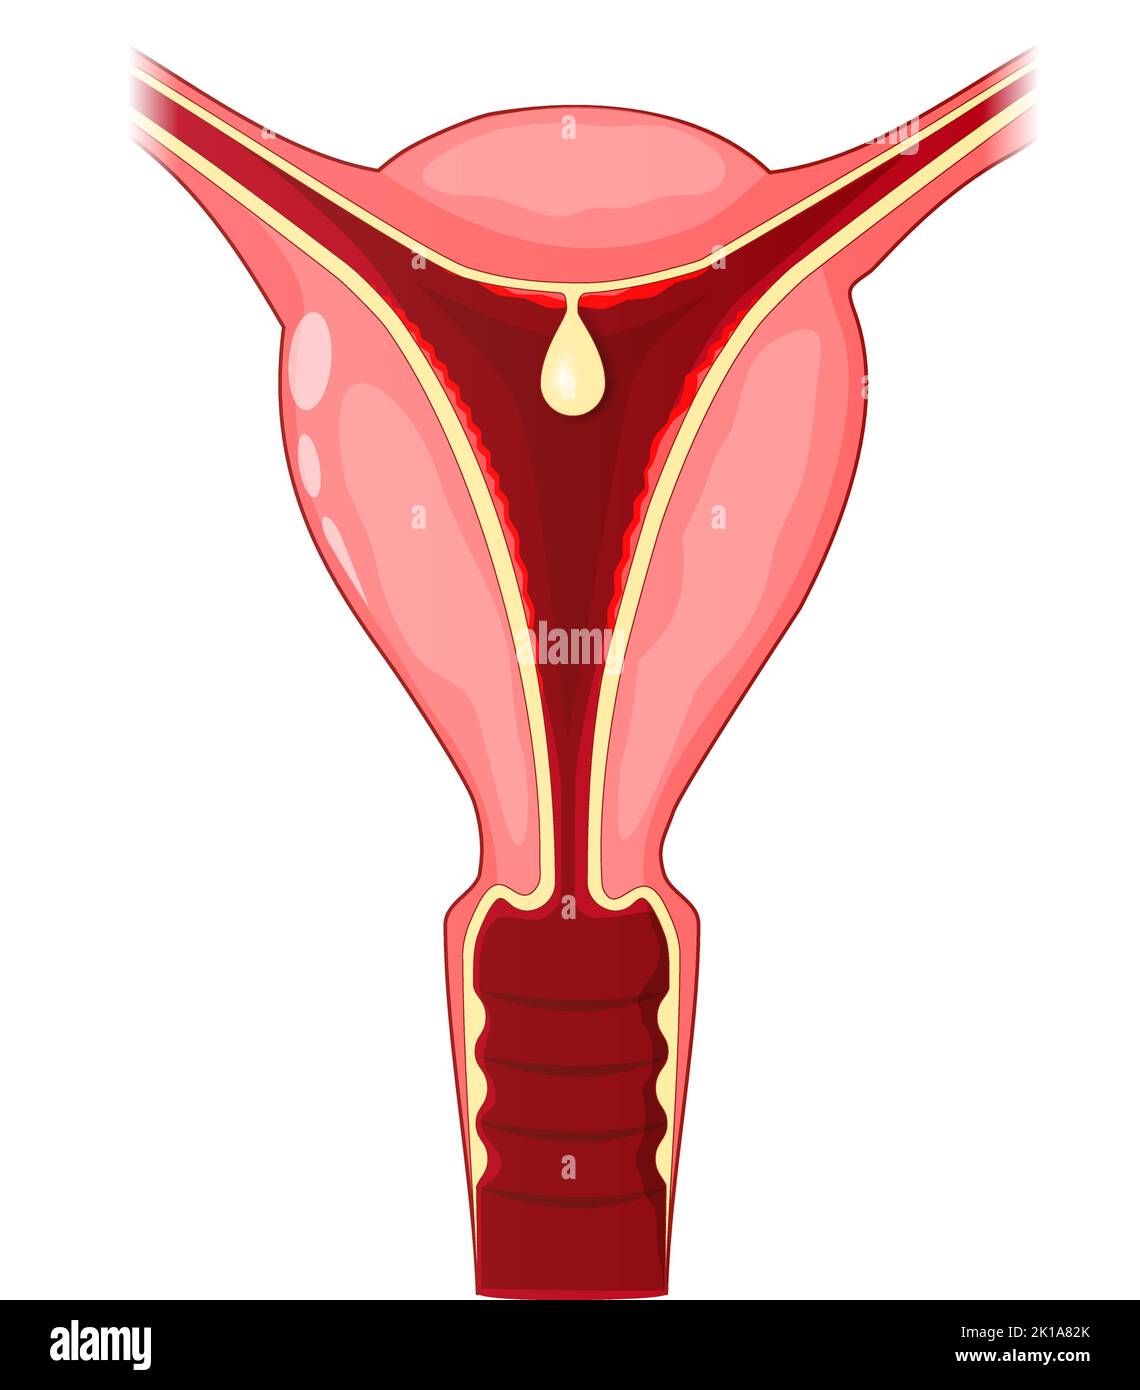 Uterine polyp. Human uterus with Endometrial polyp that attached to the uterus by an elongated pedicle. Vector poster. Stock Vector